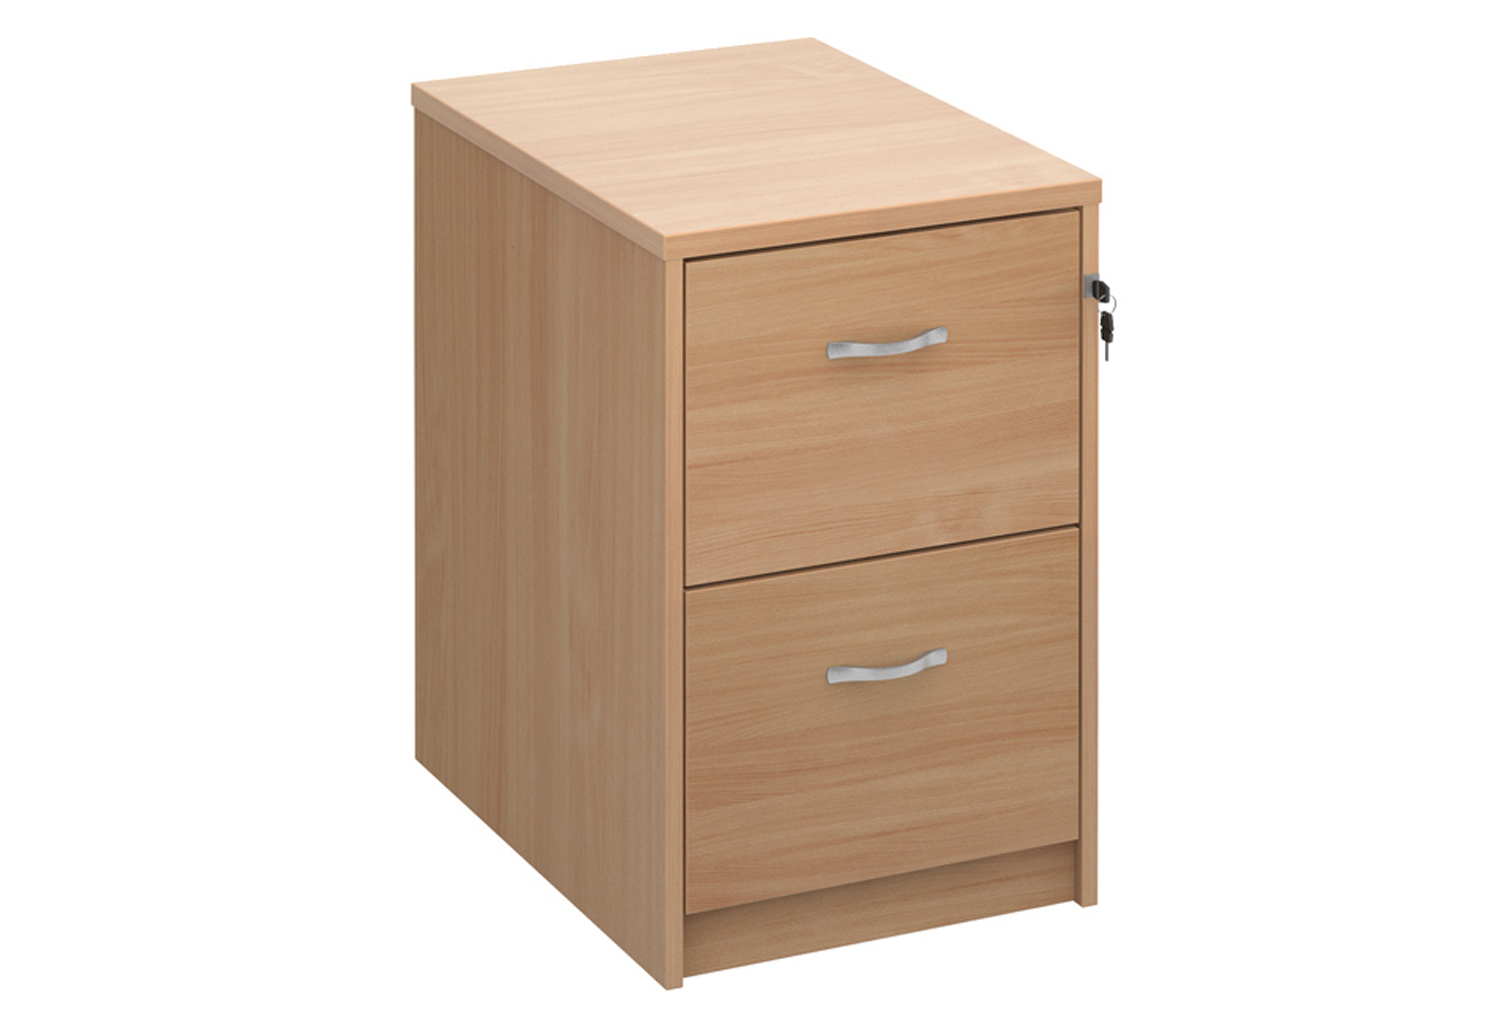 Wooden Filing Cabinets, 2 Drawer - 48wx66dx73h (cm), Beech, Fully Installed